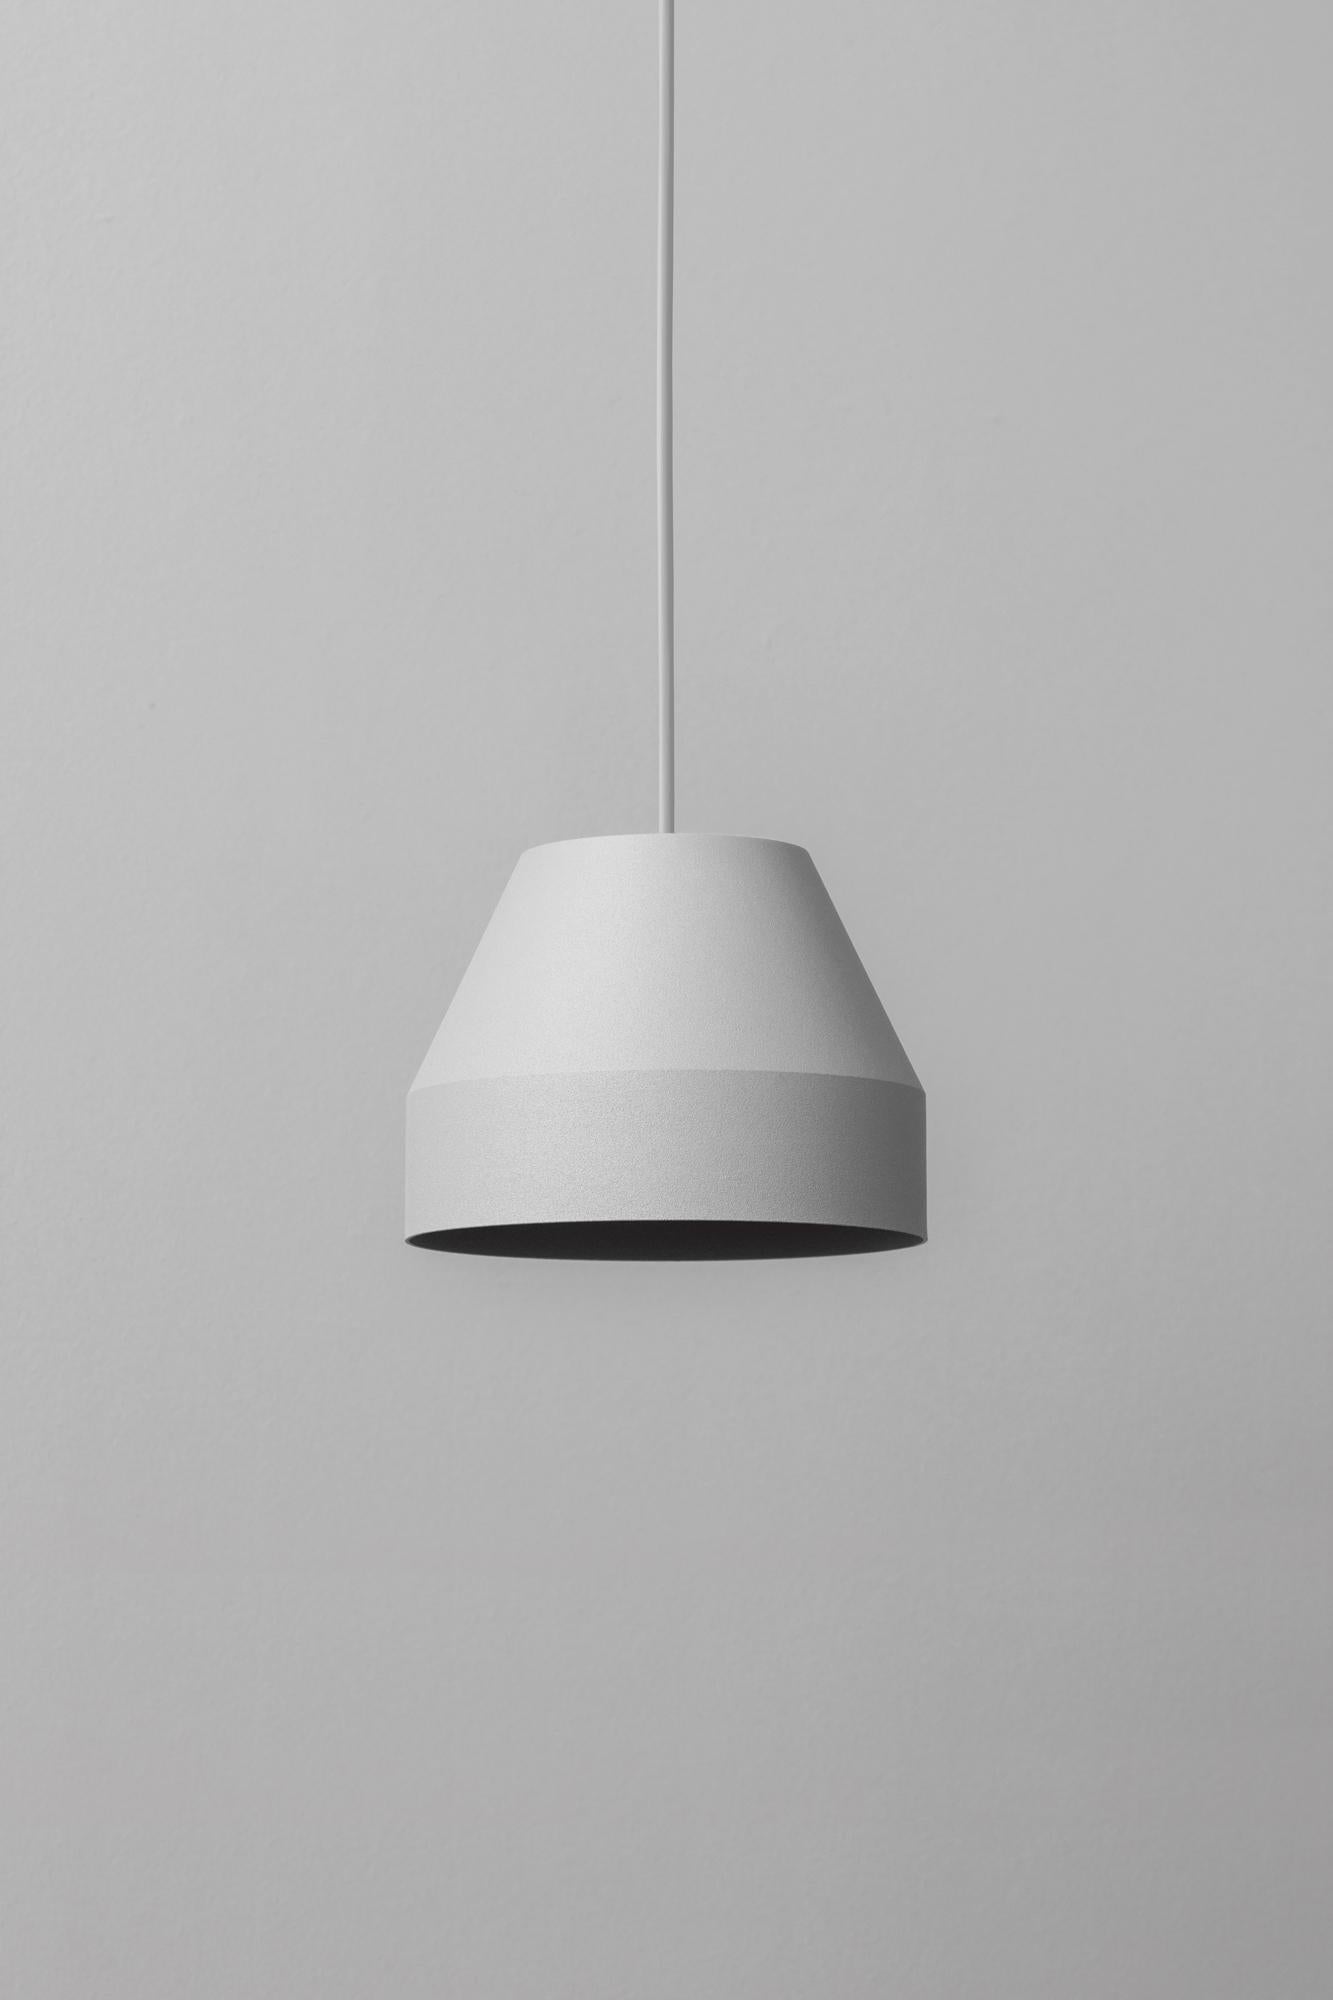 Small Grey Cap Pendant Lamp by +kouple
Dimensions: Ø 16 x H 12 cm. 
Materials: Powder-coated steel.

Available in different color options. The rod length is 200 cm. Please contact us.

All our lamps can be wired according to each country. If sold to